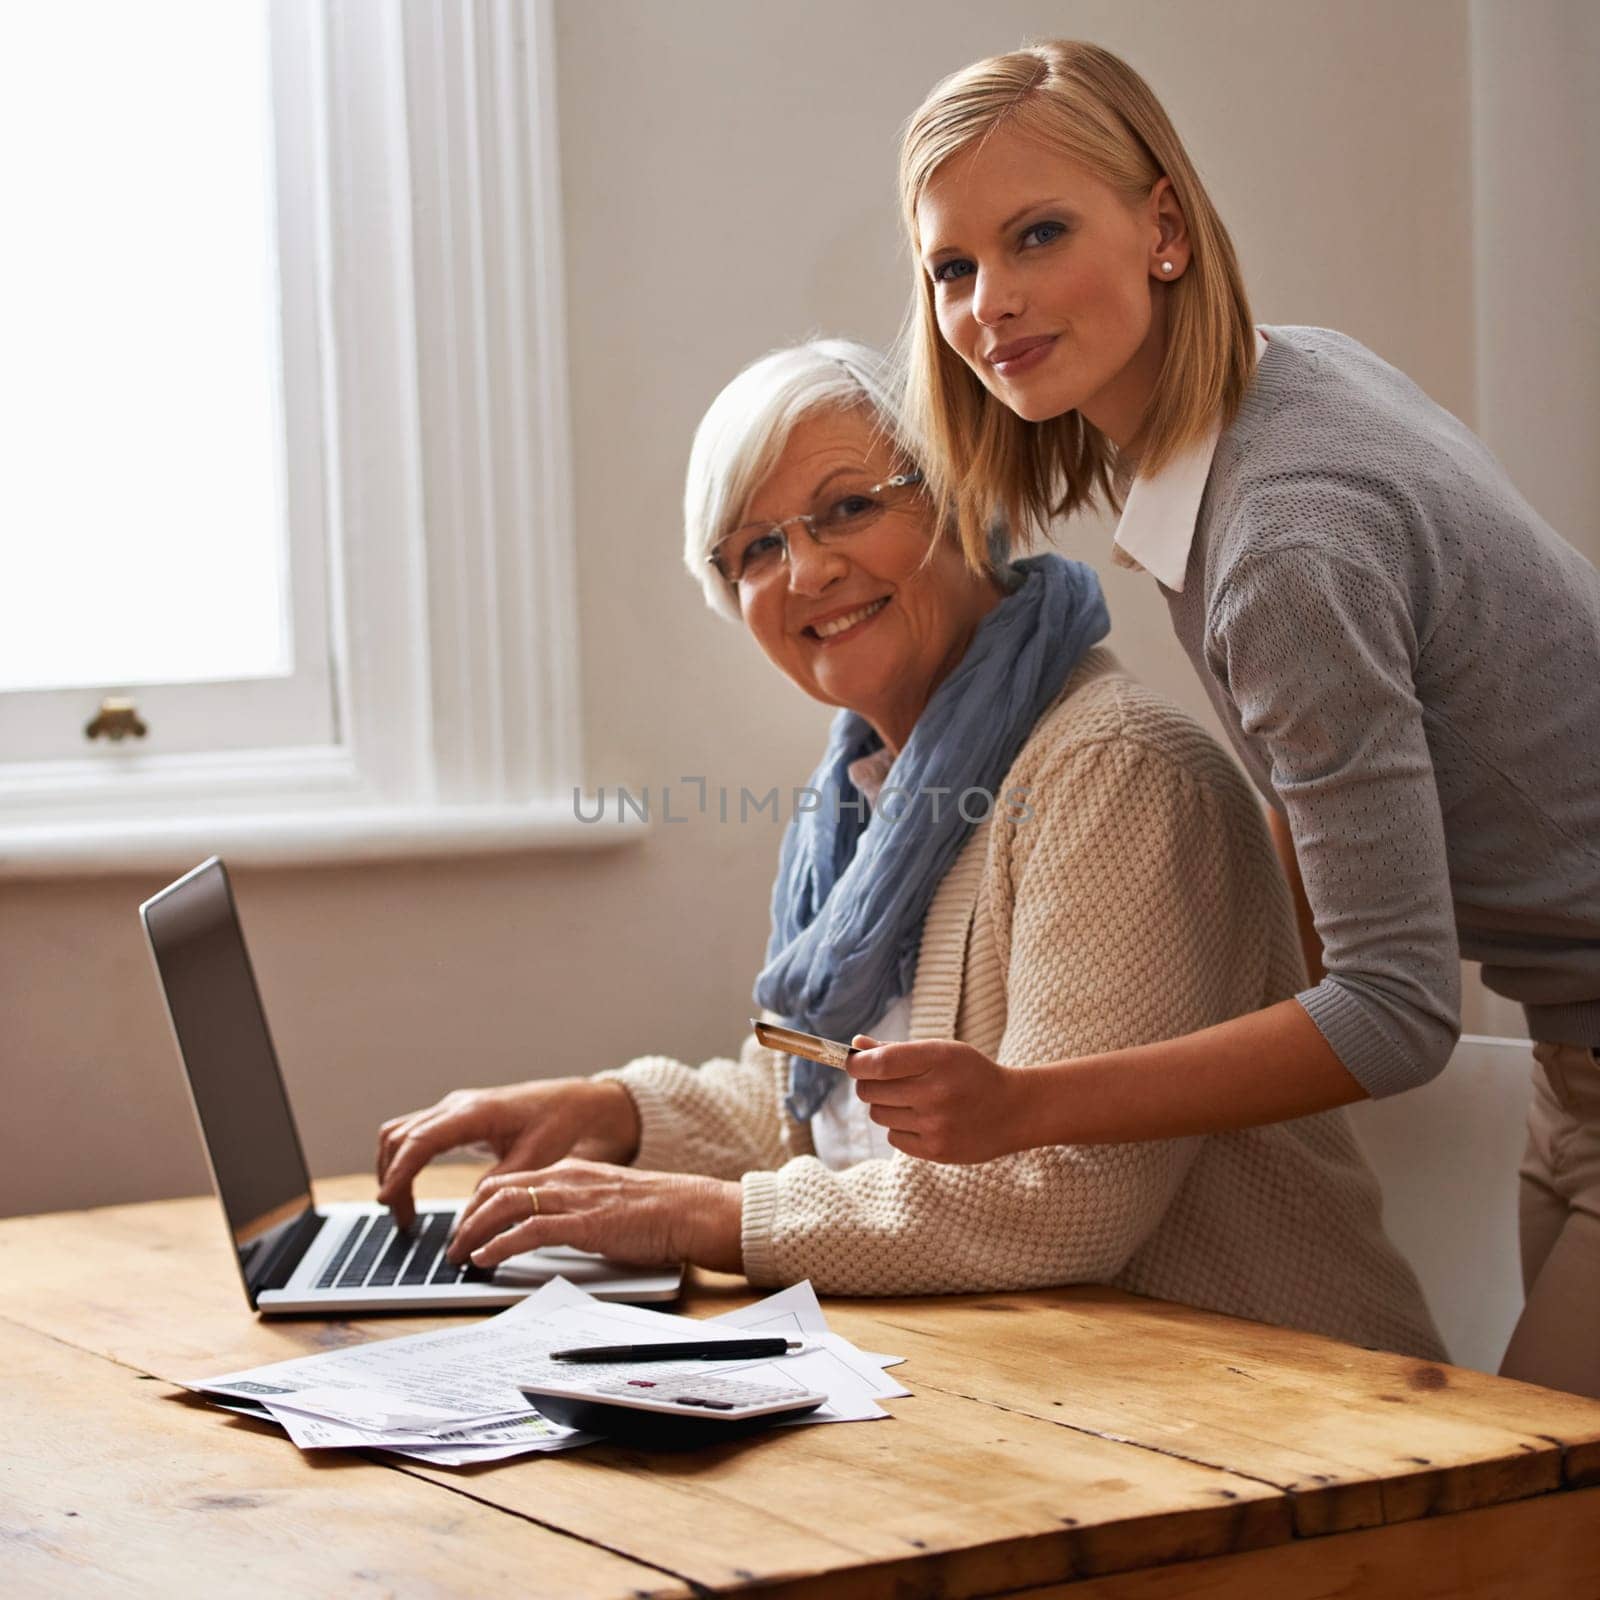 Granddaughter, grandmother and help with laptop for budget, finance and technology with advice and assistance. Women pay bills online, life insurance or tax paperwork with retirement and portrait.